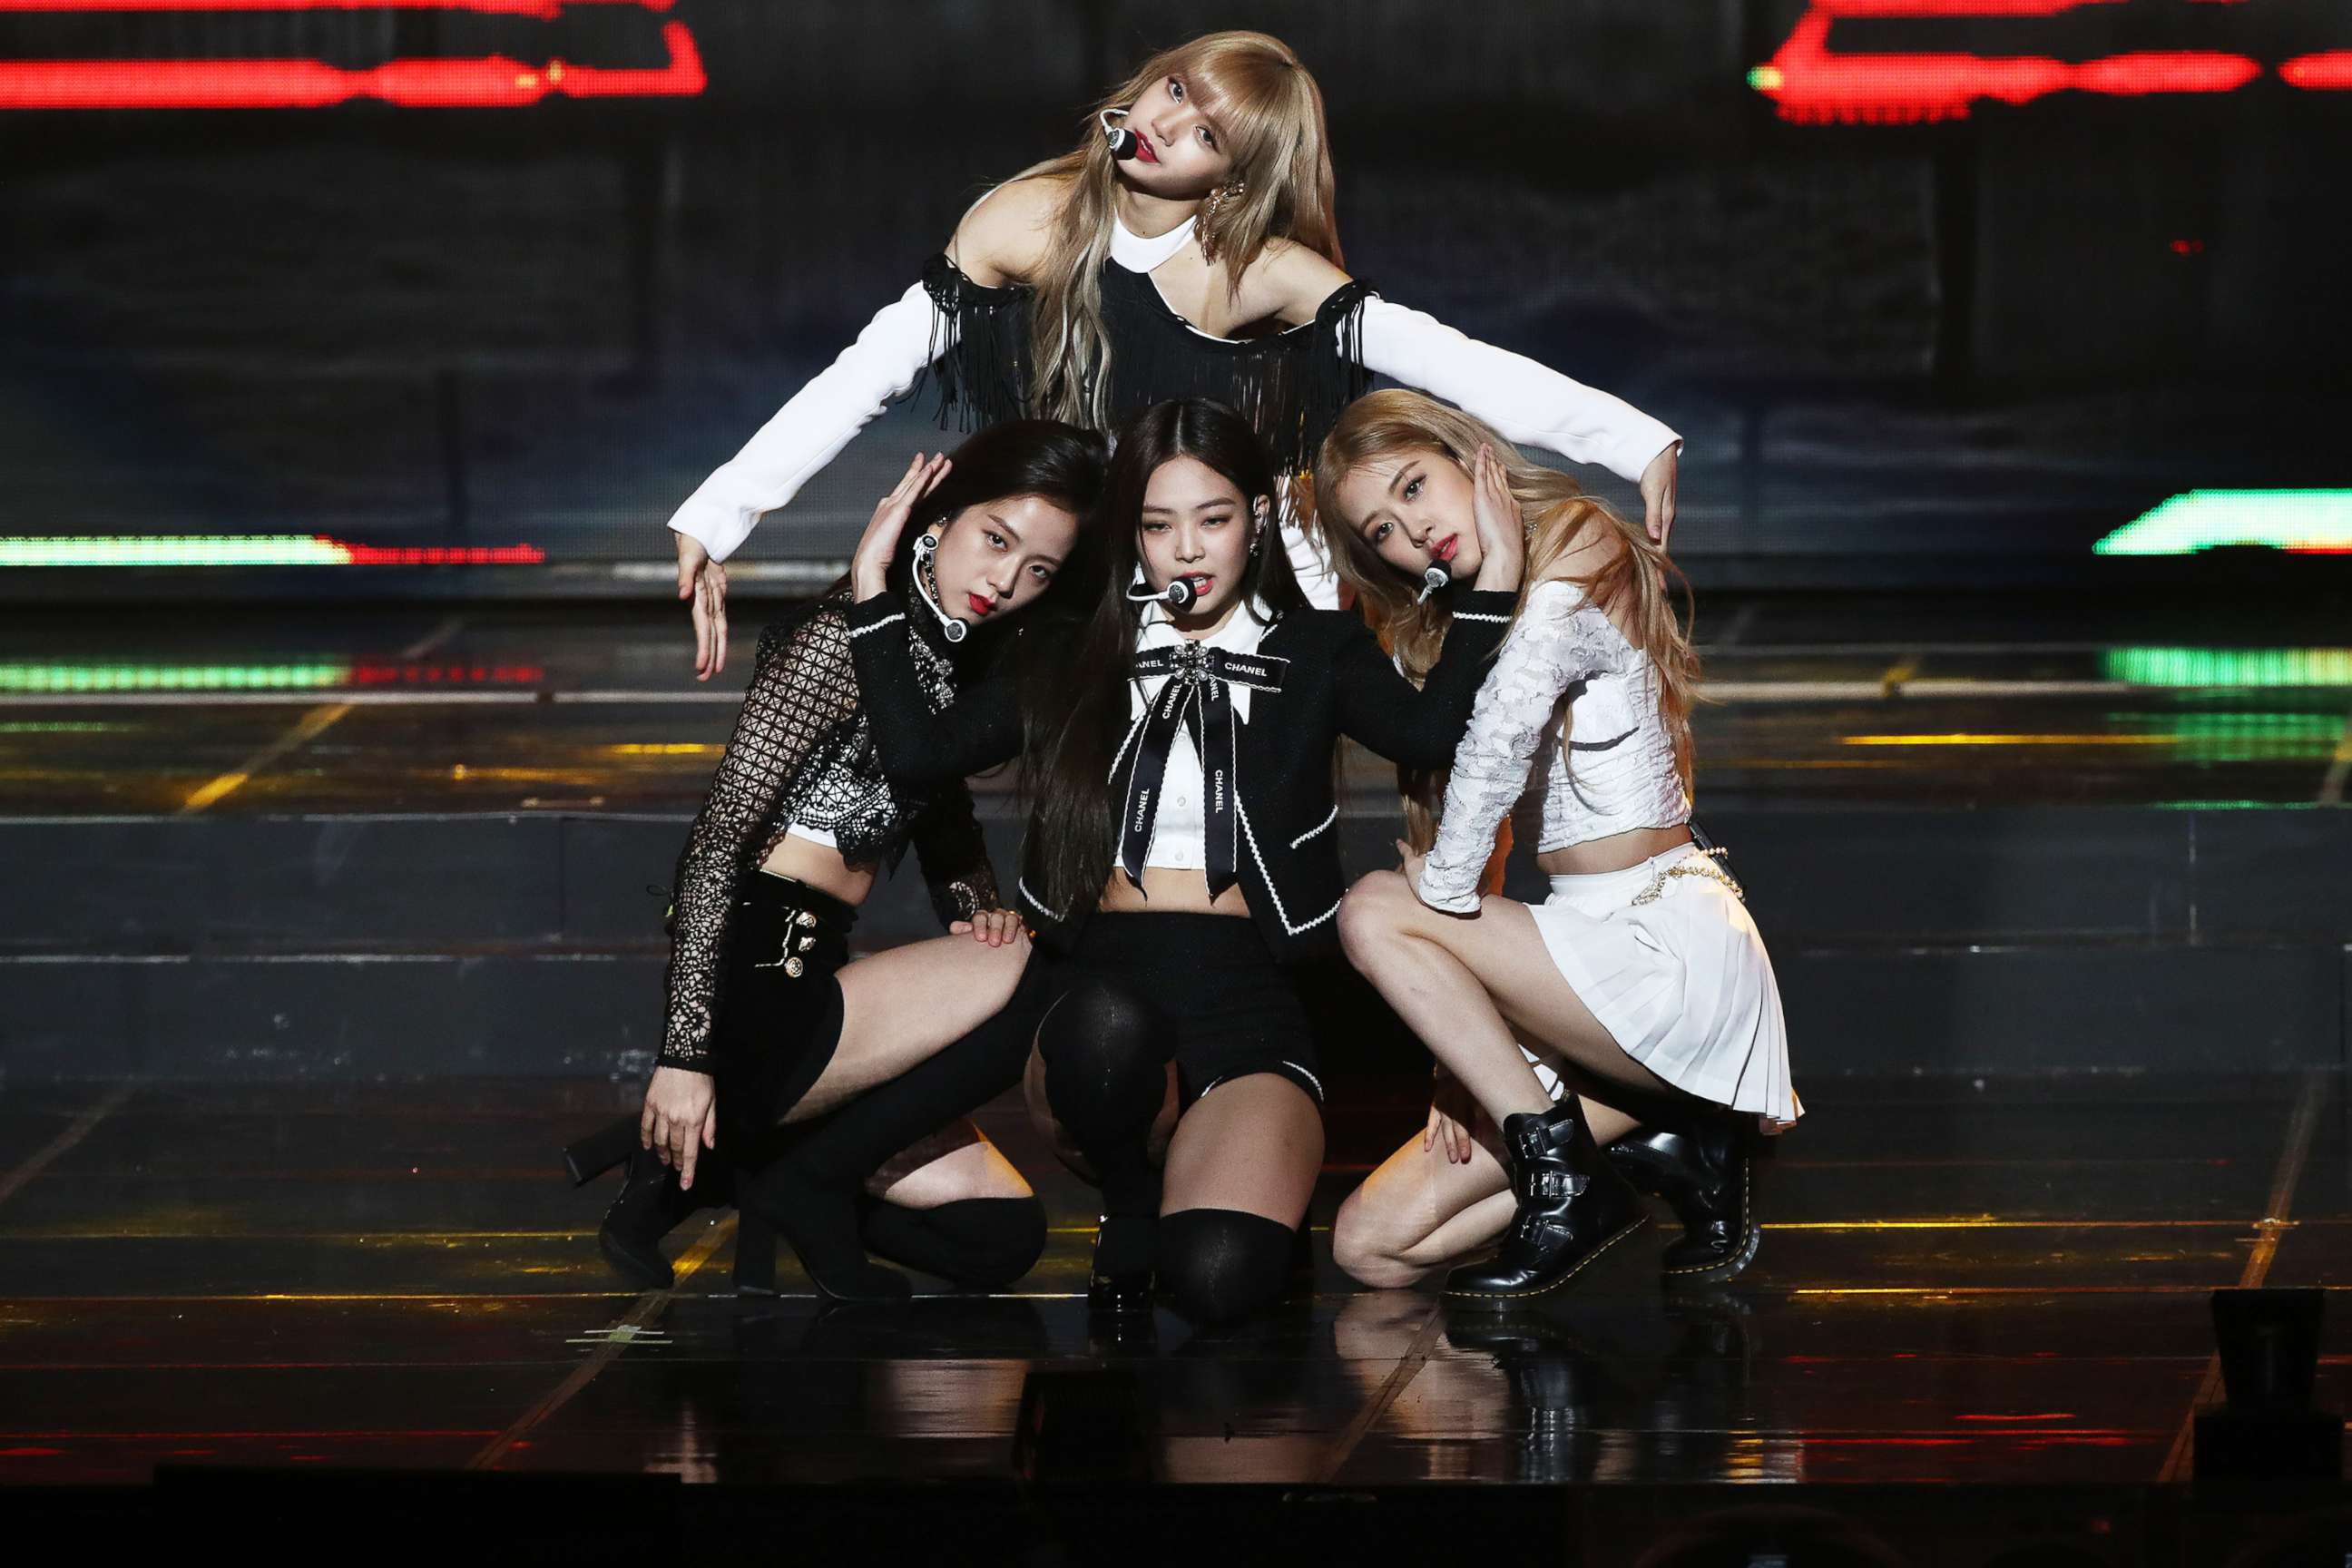 PHOTO: Girl group BlackPink performs on stage during the 8th Gaon Chart K-Pop Awards on Jan. 23, 2019 in Seoul, South Korea.